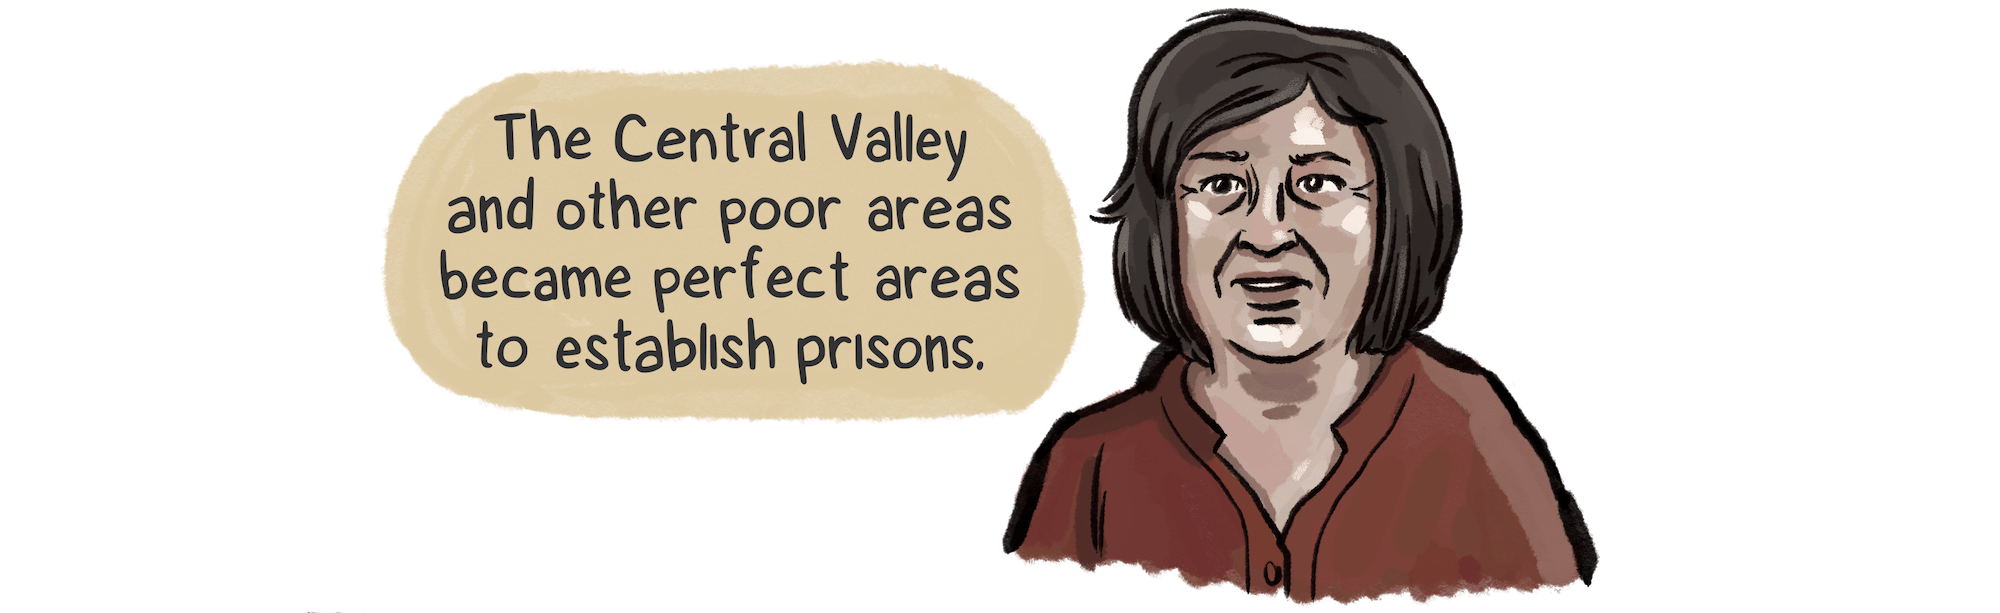 A White woman with dark brown hair and a red shirt named Jeanette Todd says, “The Central Valley and other poor areas became perfect areas to establish prisons.”